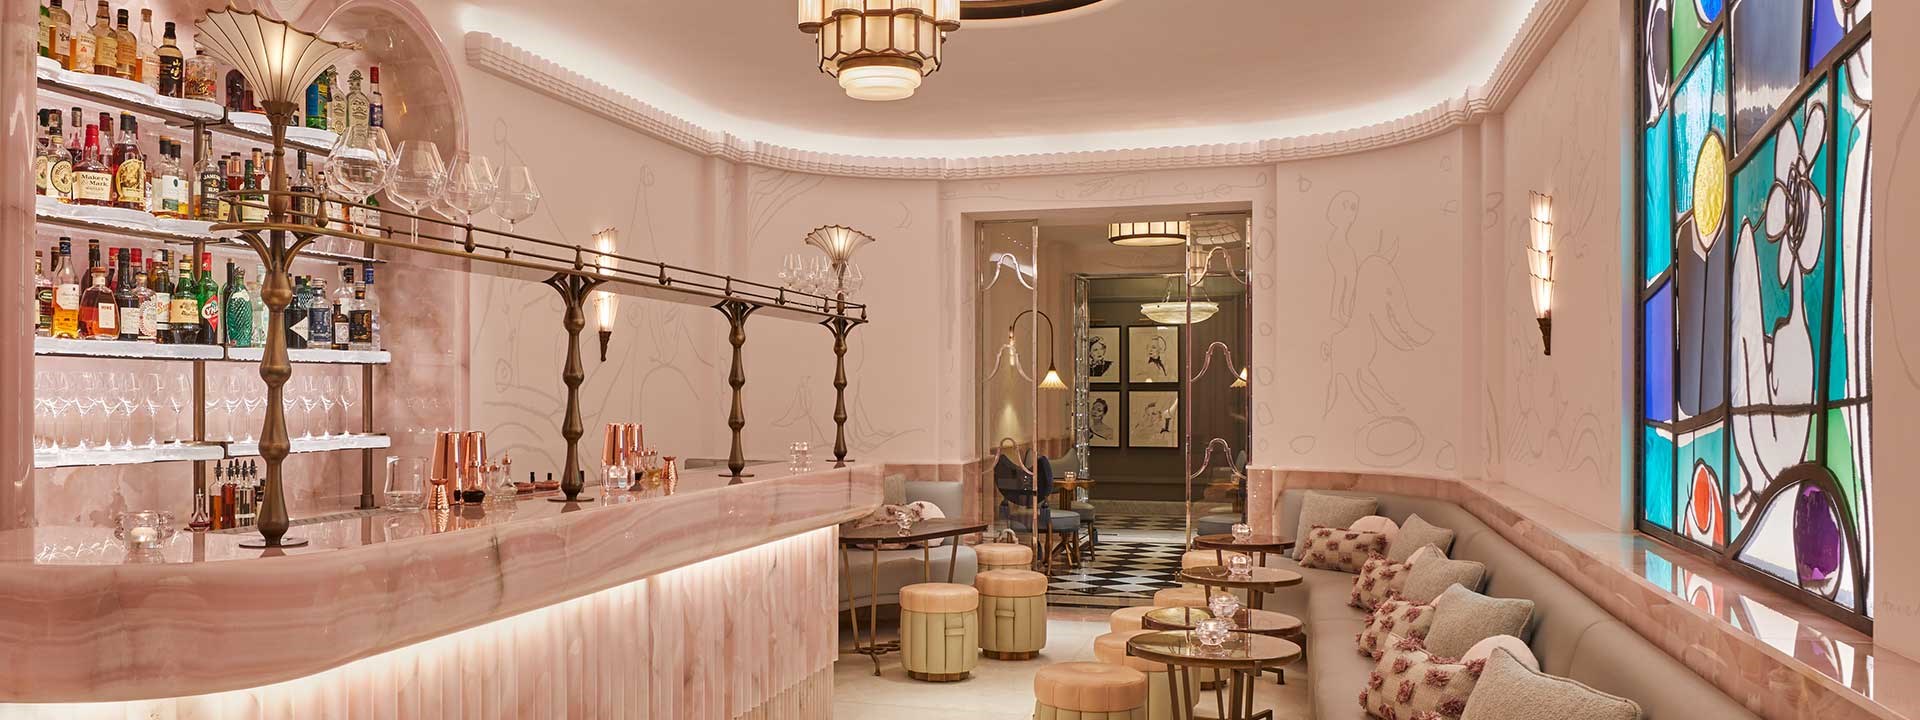 The pink interior design of The Painter's Room cocktail bar at Claridge's Hotel, with plenty of seating.